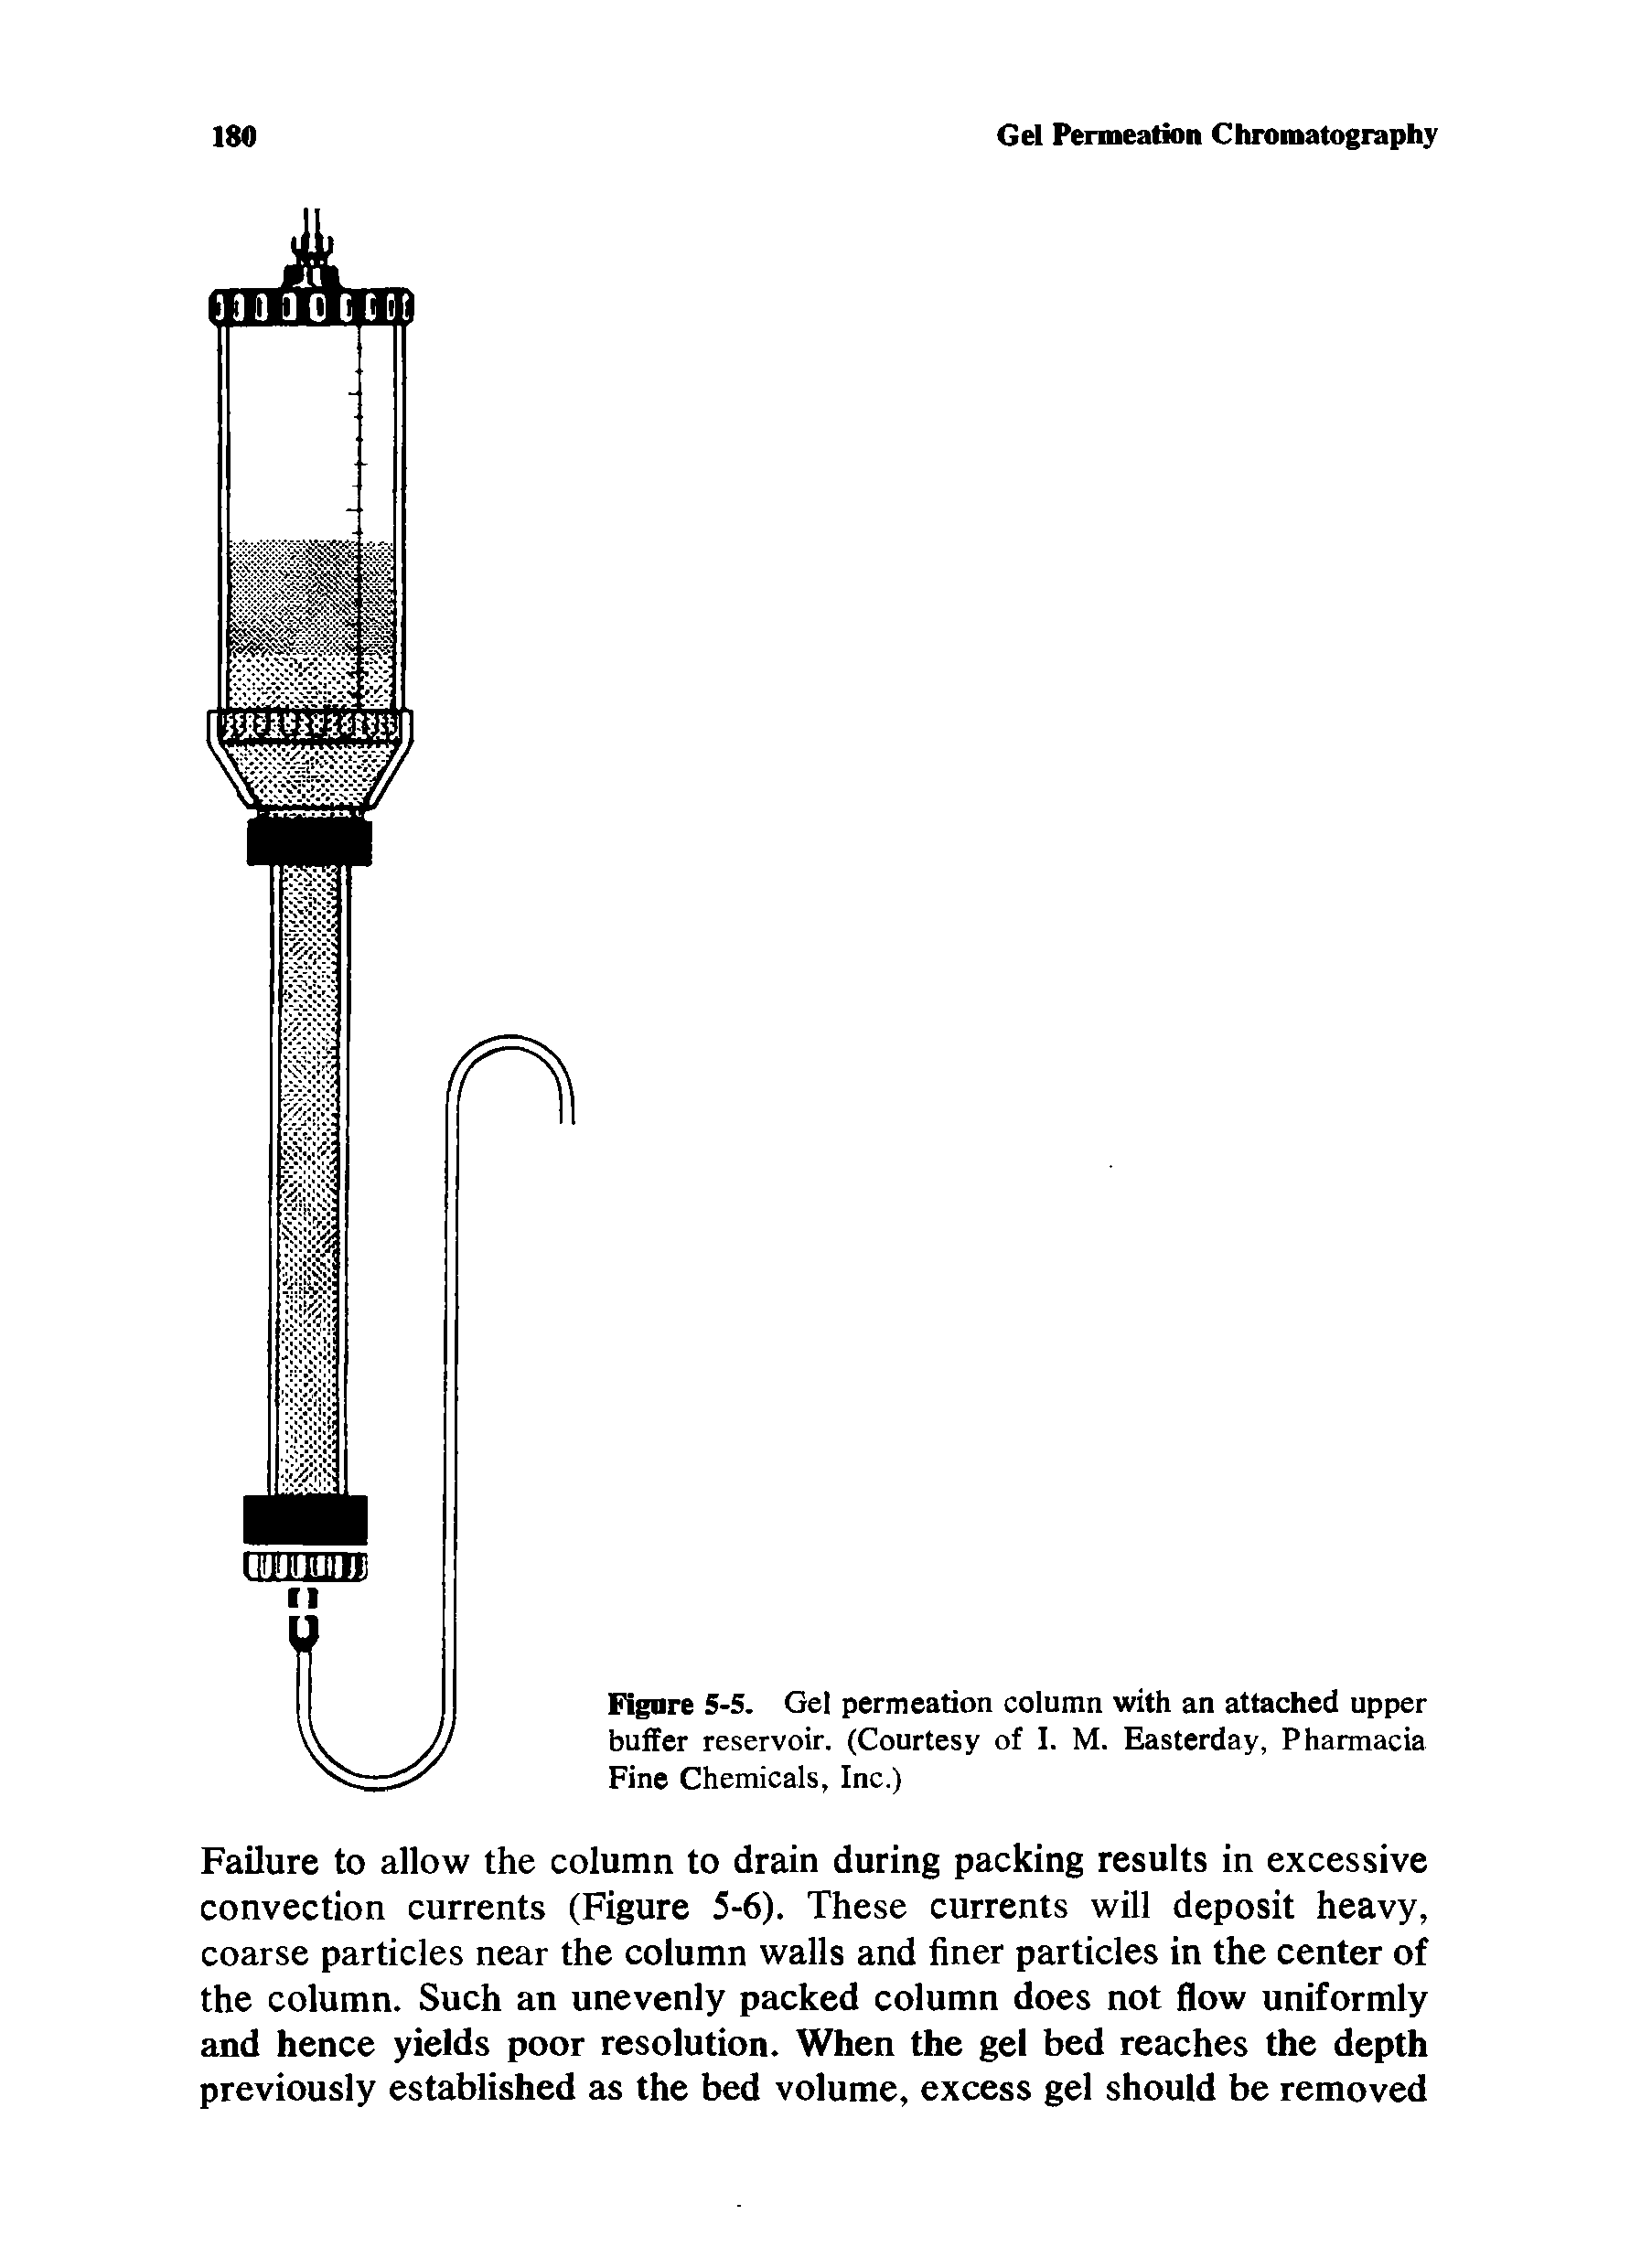 Figure 5-5. Gel permeation column with an attached upper buffer reservoir. (Courtesy of I. M. Easterday, Pharmacia Fine Chemicals, Inc.)...